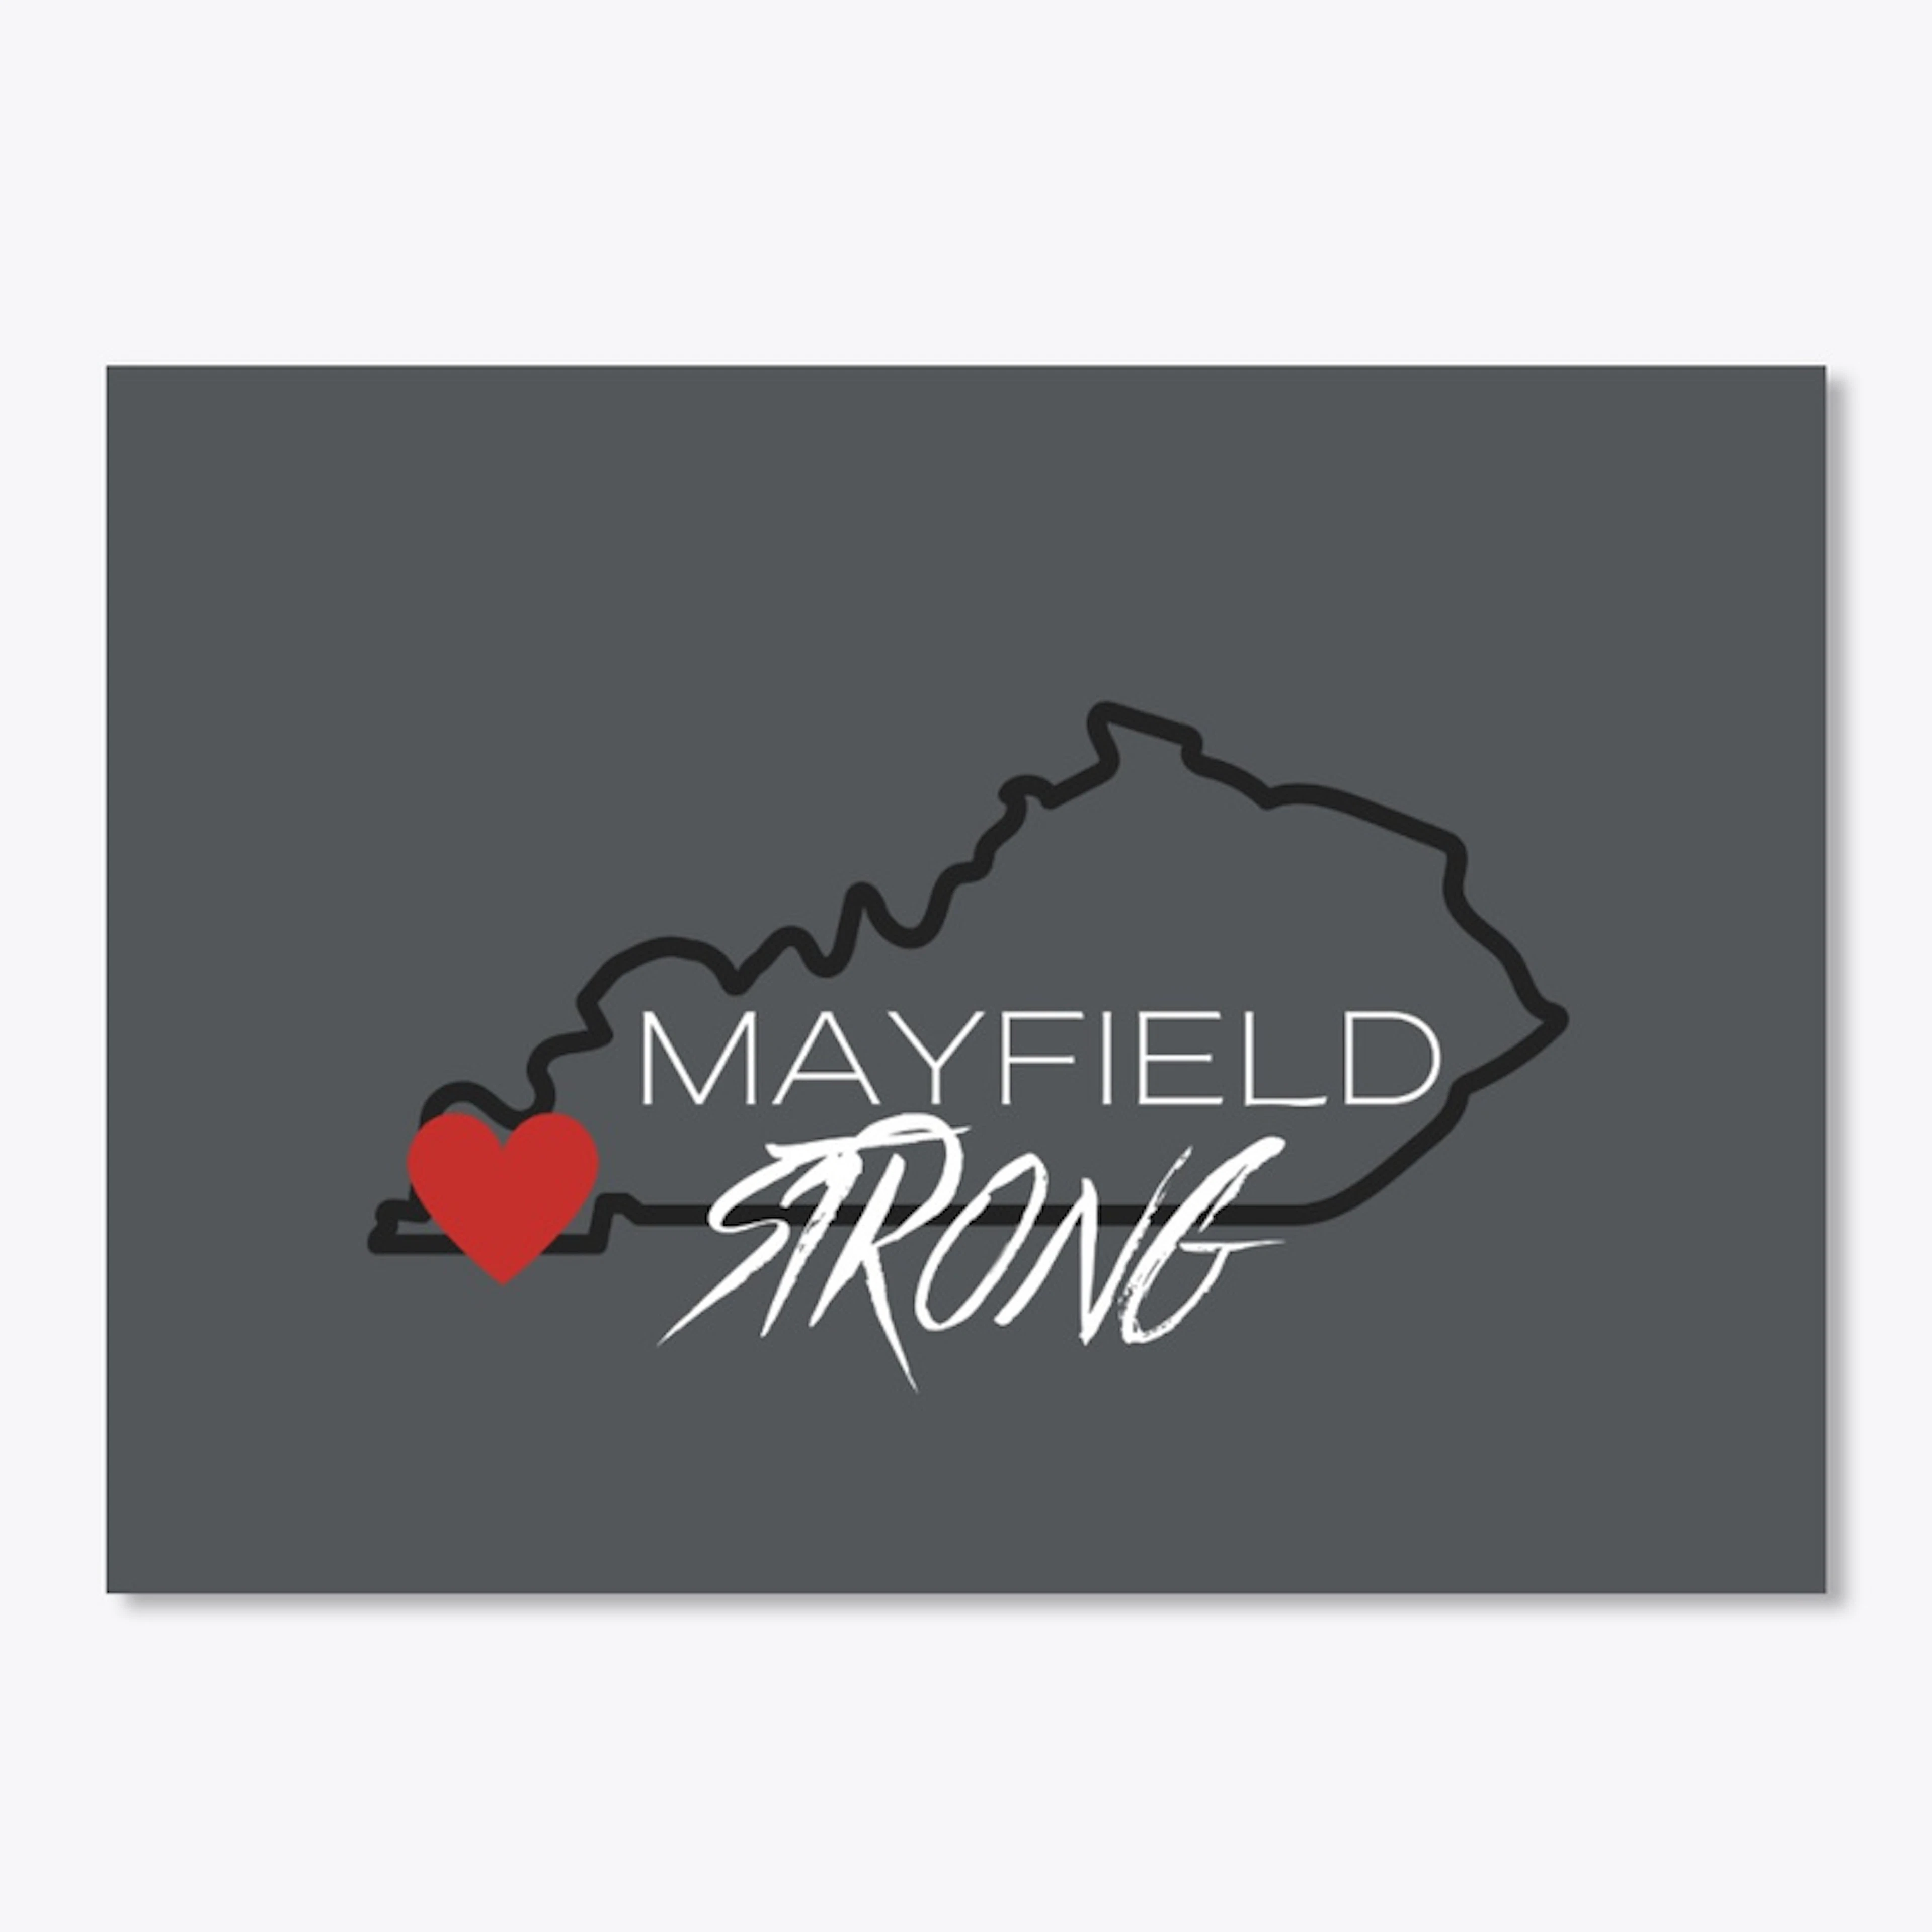 MAYFIELD STRONG